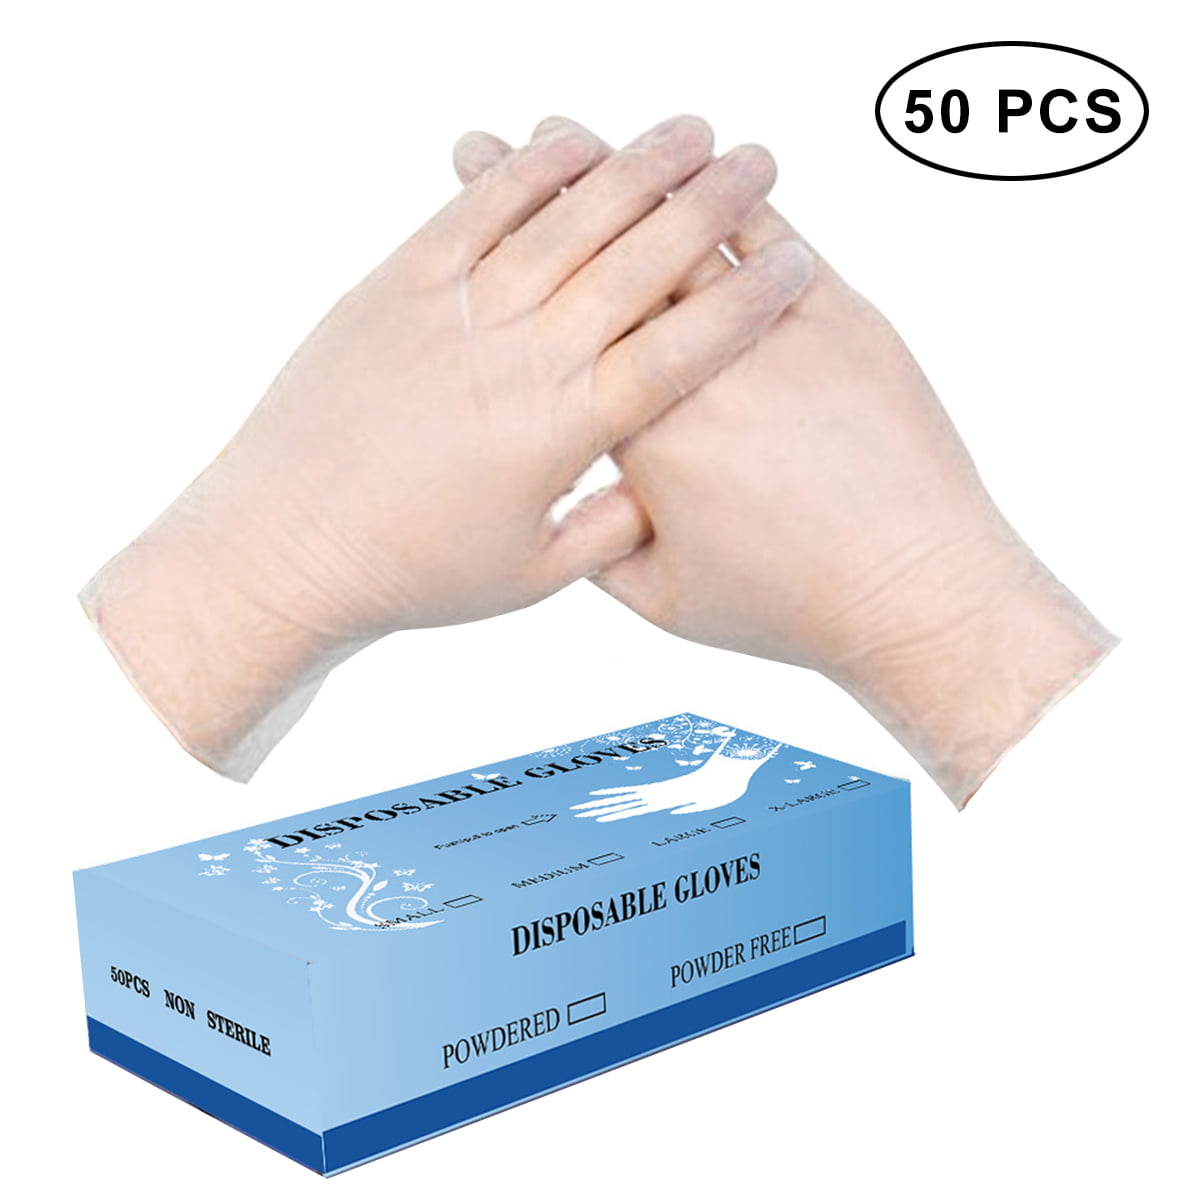 Latex Free,High Density Safety Protective Gloves Allergy L 100 Pcs KAIXLIONLY Vinyl Gloves Disposable Clear Powder Free 